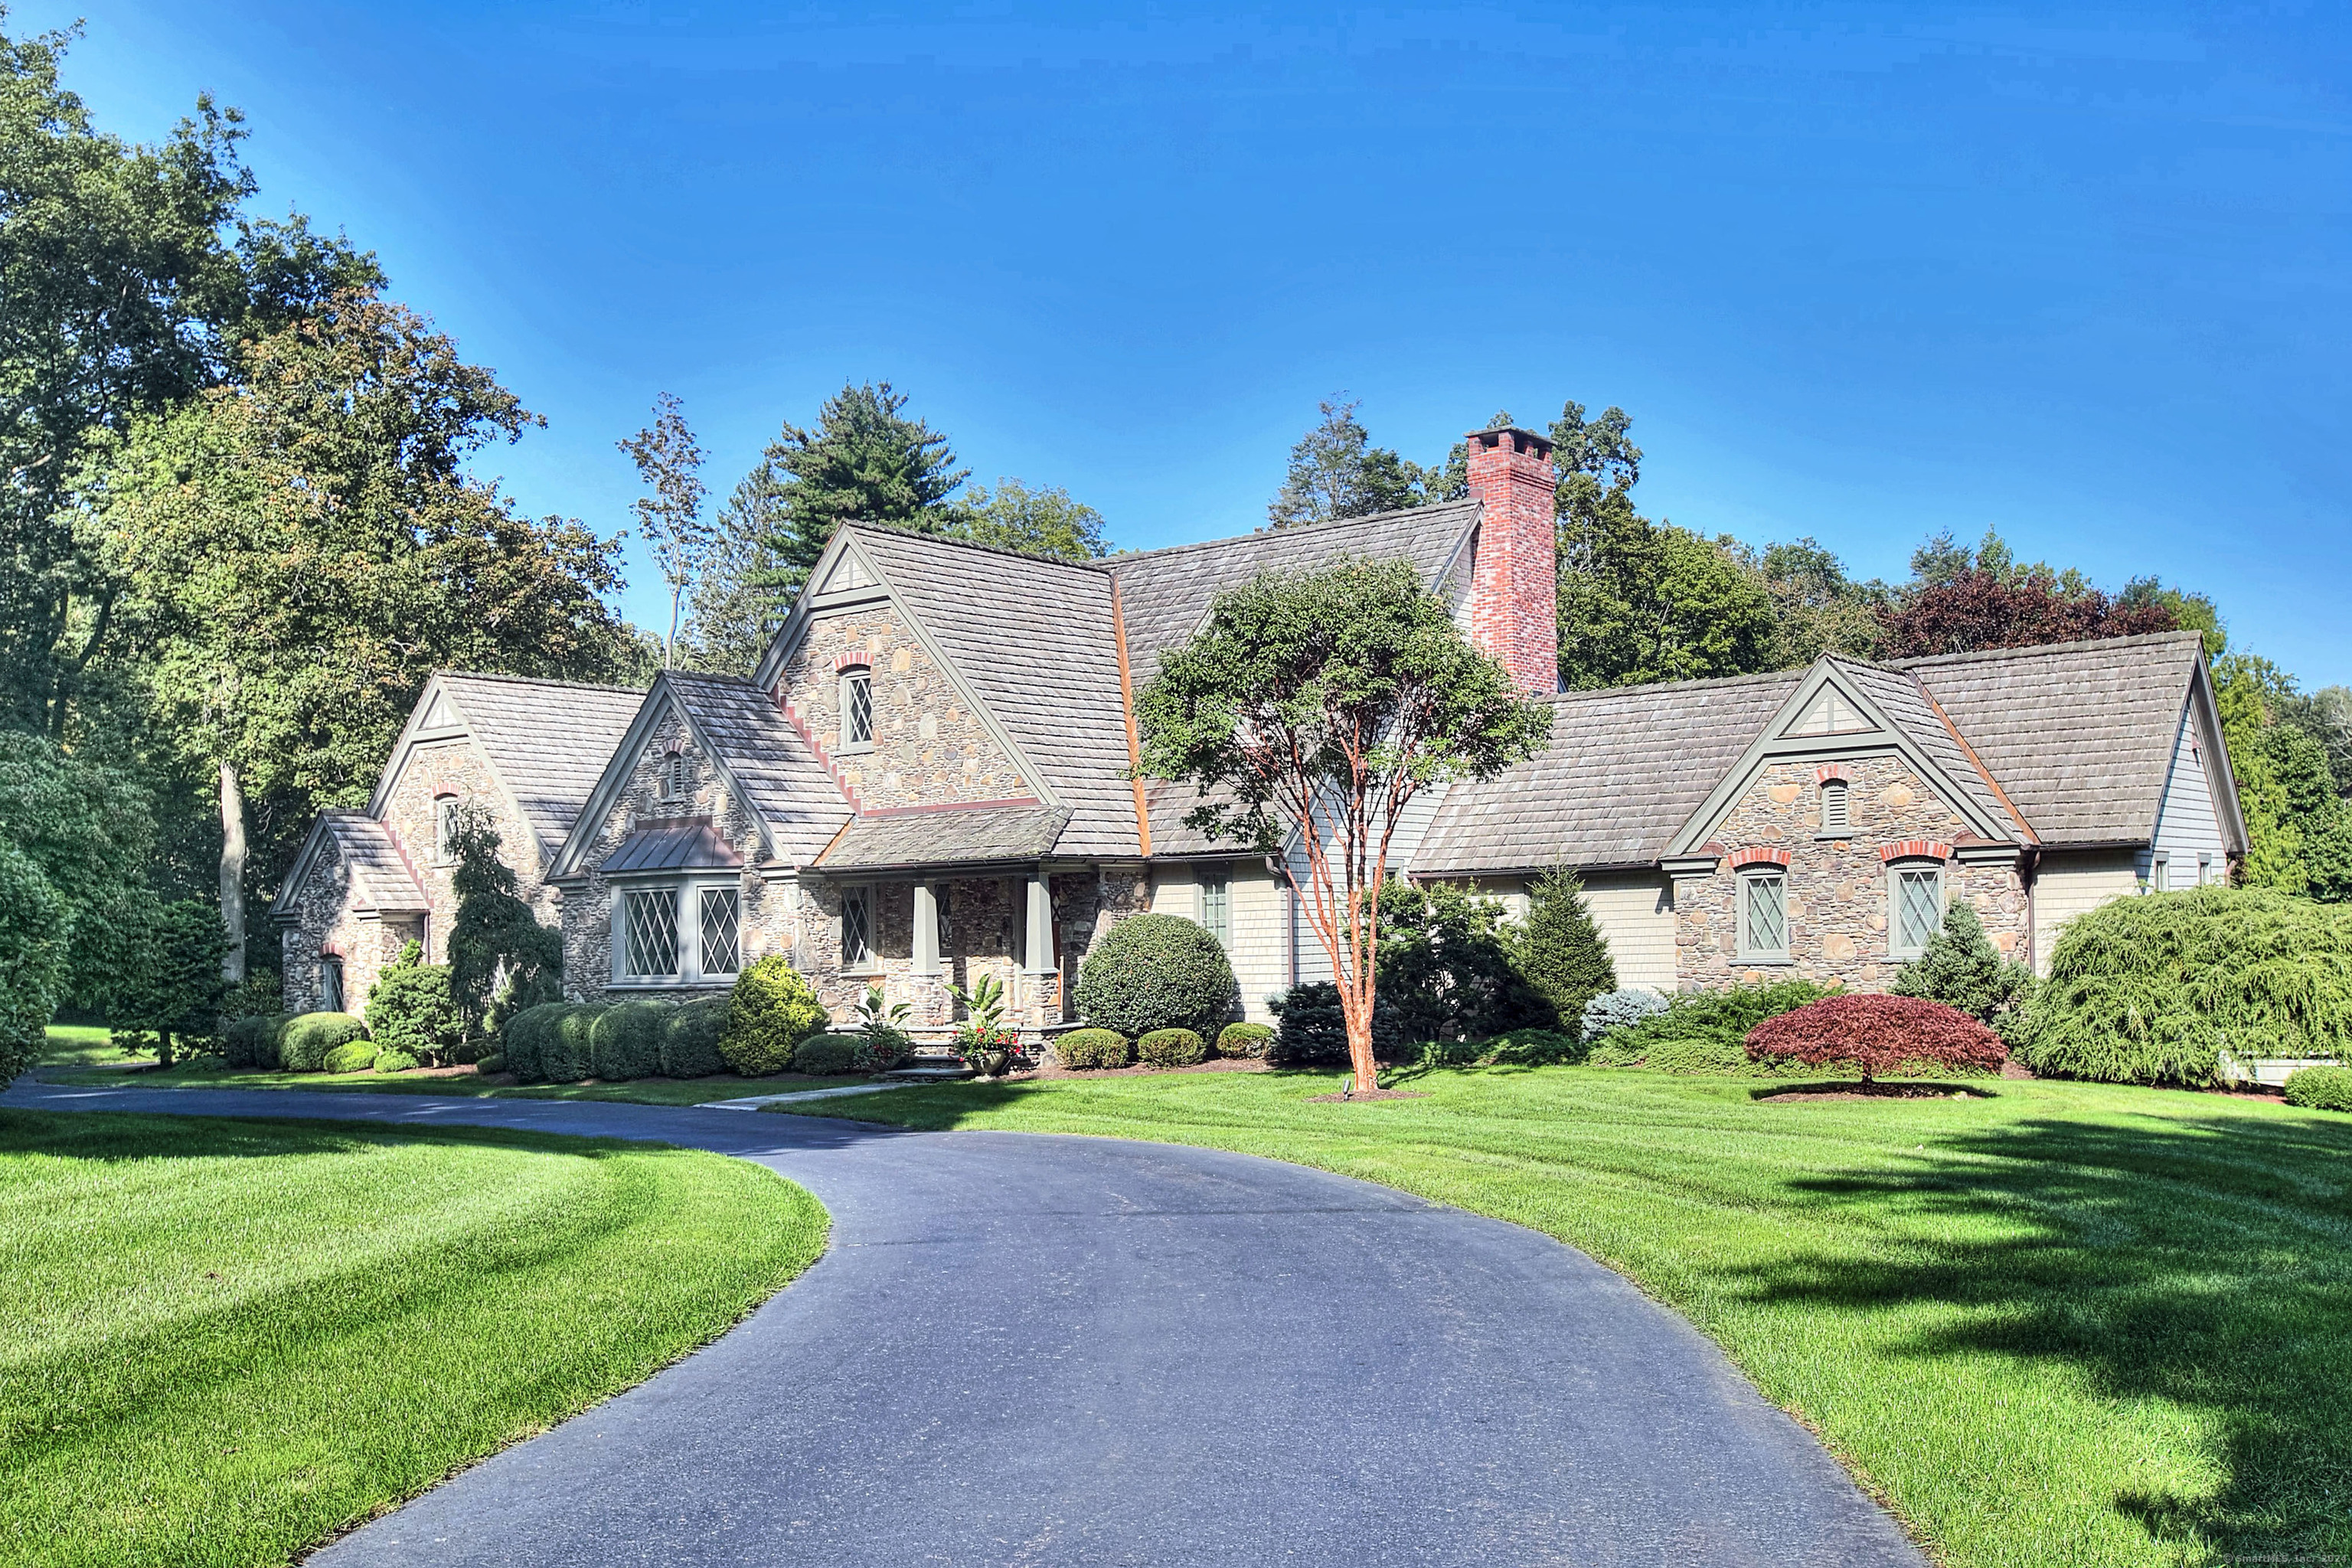 This distinctive estate in Lower Greenfield Hill offers the ideal blend of Old World style and character with the benefits of high-quality, recent construction. Set on over two acres of exquisite grounds with rich history and provenance, this is a rare find that will enchant you upon arrival. The stone and shingle design of this residence speaks to the quality and timeliness of the interiors that await your discovery. The open floor plan lends itself to effortless entertaining, while stone fireplaces, custom beams and tasteful millwork infuse a sense of history and warmth to the gracious spaces. Distinctive features include the custom gourmet kitchen with Wolf, Miele and Sub Zero appliances, artisanal cabinetry, a butler's pantry and great flow into the family room with an incredible fireplace and cathedral ceiling. The first floor primary suite is a luxurious retreat, complete with a fireplace, elegant private bath and an expansive custom closet. The flexible layout includes spaces for fantastic home office space, in-law suite, staff quarters and much more. Auto enthusiasts will want to take note: this property offers both a three-car attached garage, as well as an incredible five-car heated carriage house offering a total of eight garage bays. The postcard-worthy acreage includes a pool and sunken garden, featured in prestigious garden tours. Imagine an incredibly tranquil retreat that offers direct convenience to town, commuting, and all amenities.